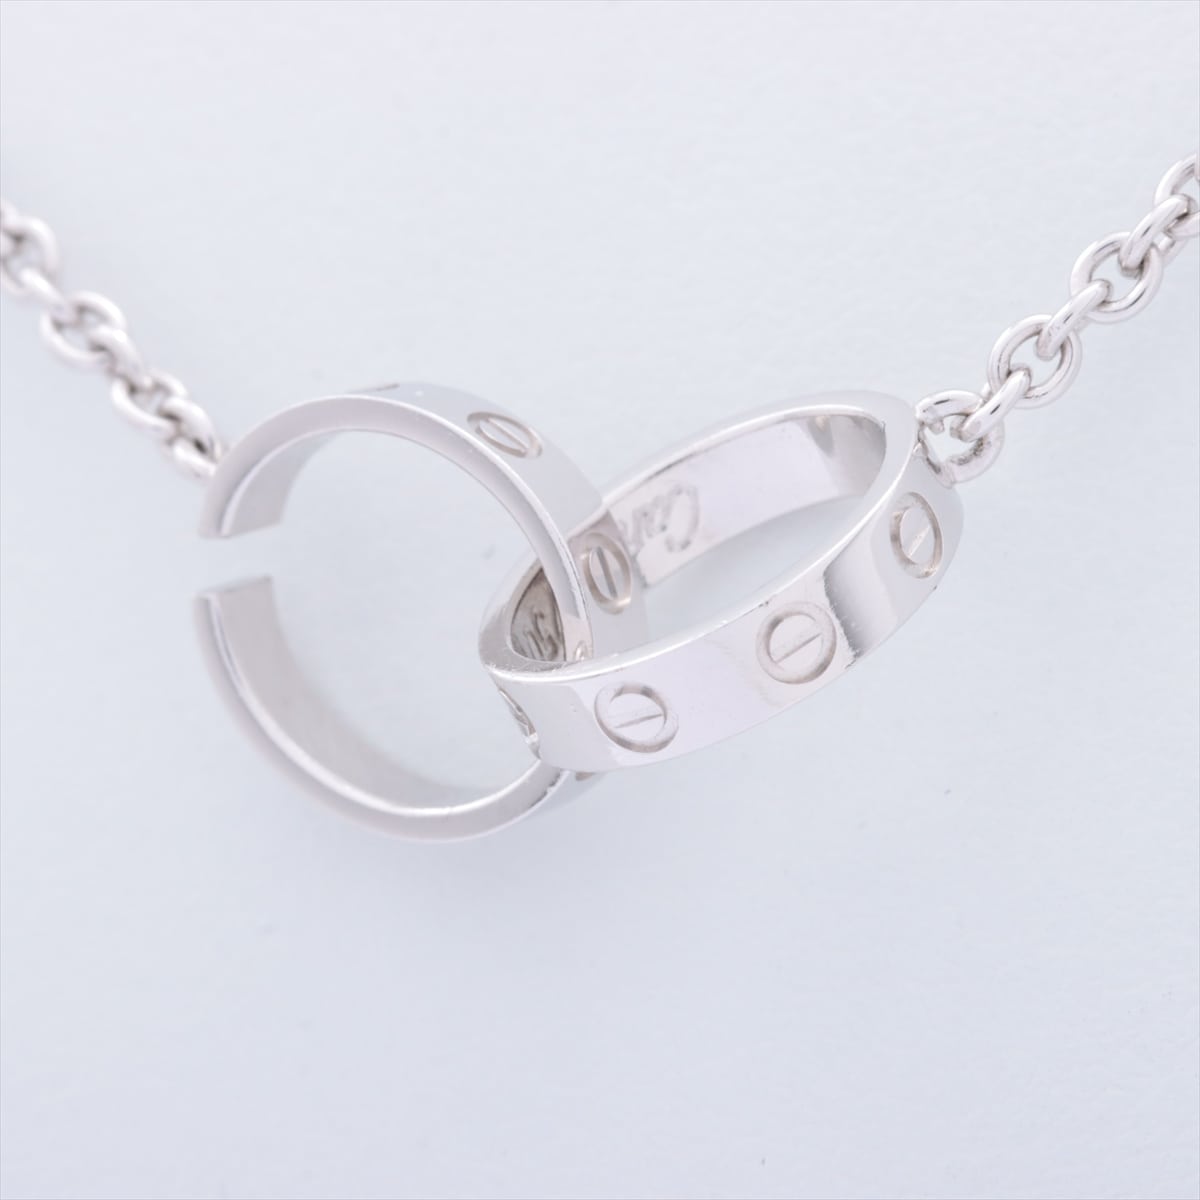 Cartier Baby Love Necklace 750 WG 7.6g